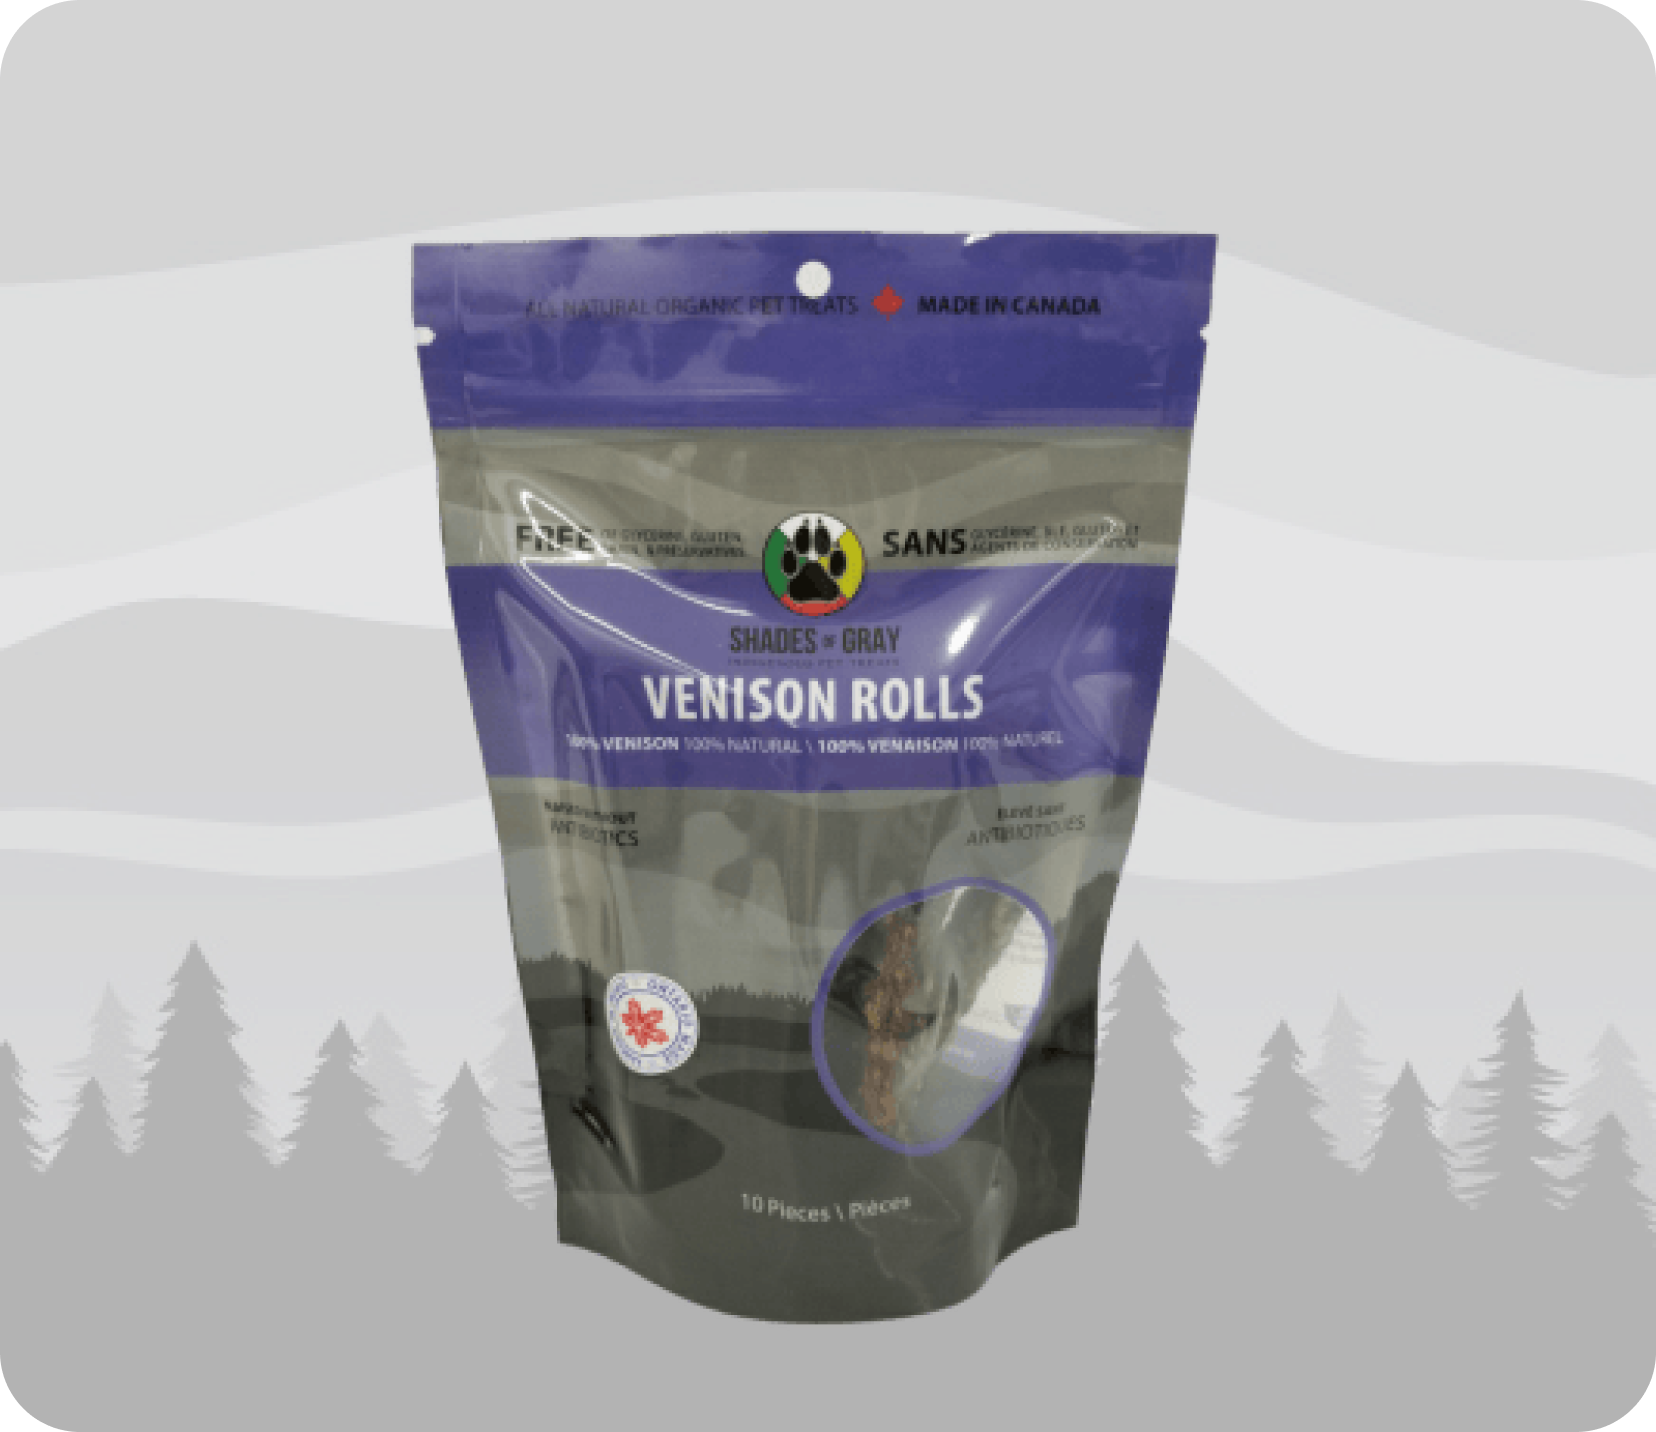 Venison Roll pet treats made with organic all natural 100% Venison, for your cats and dogs. Free of Glycerine, Gluten, Grain & Preservatives.